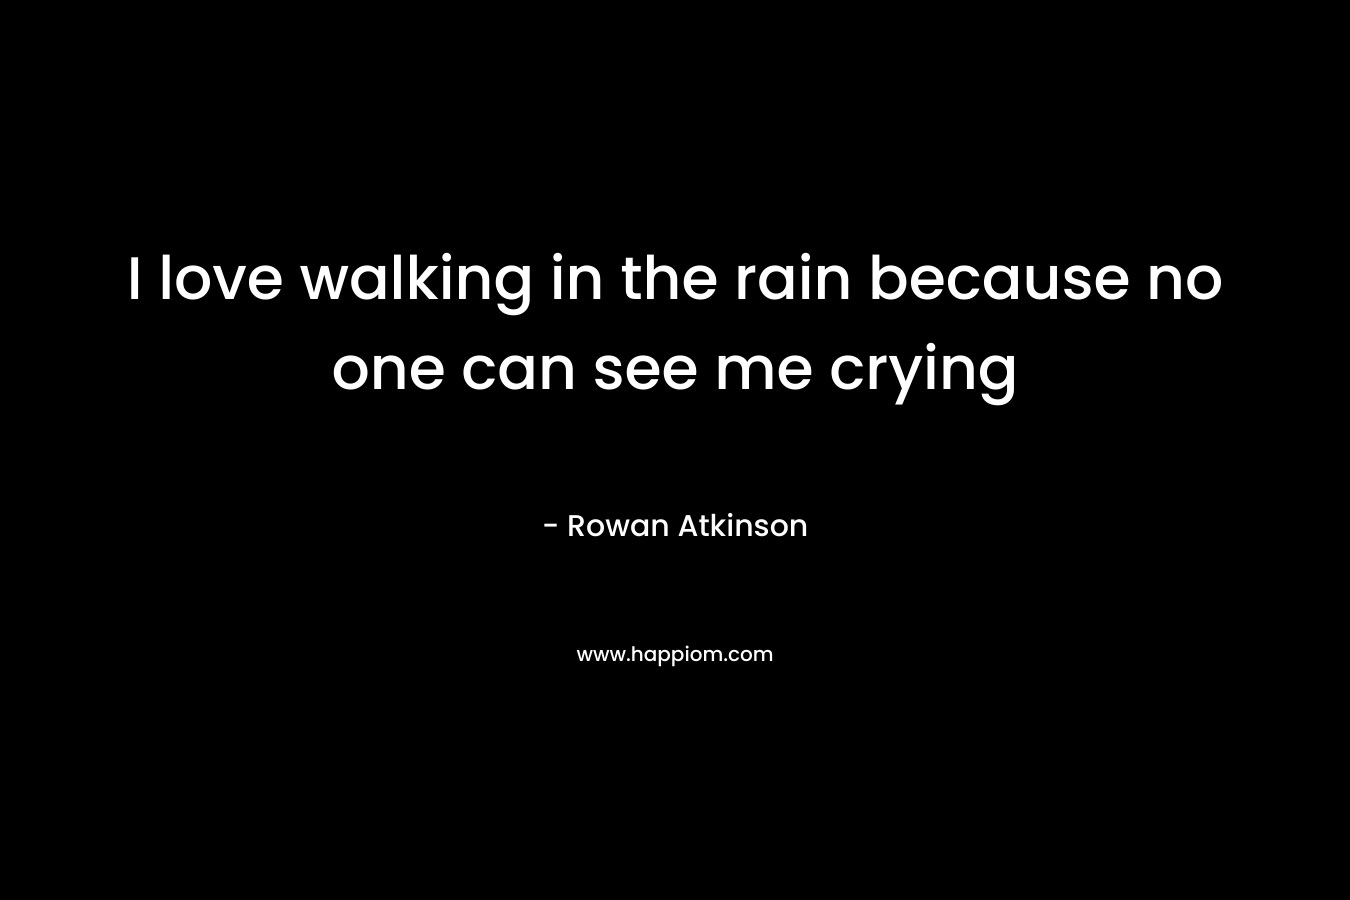 I love walking in the rain because no one can see me crying